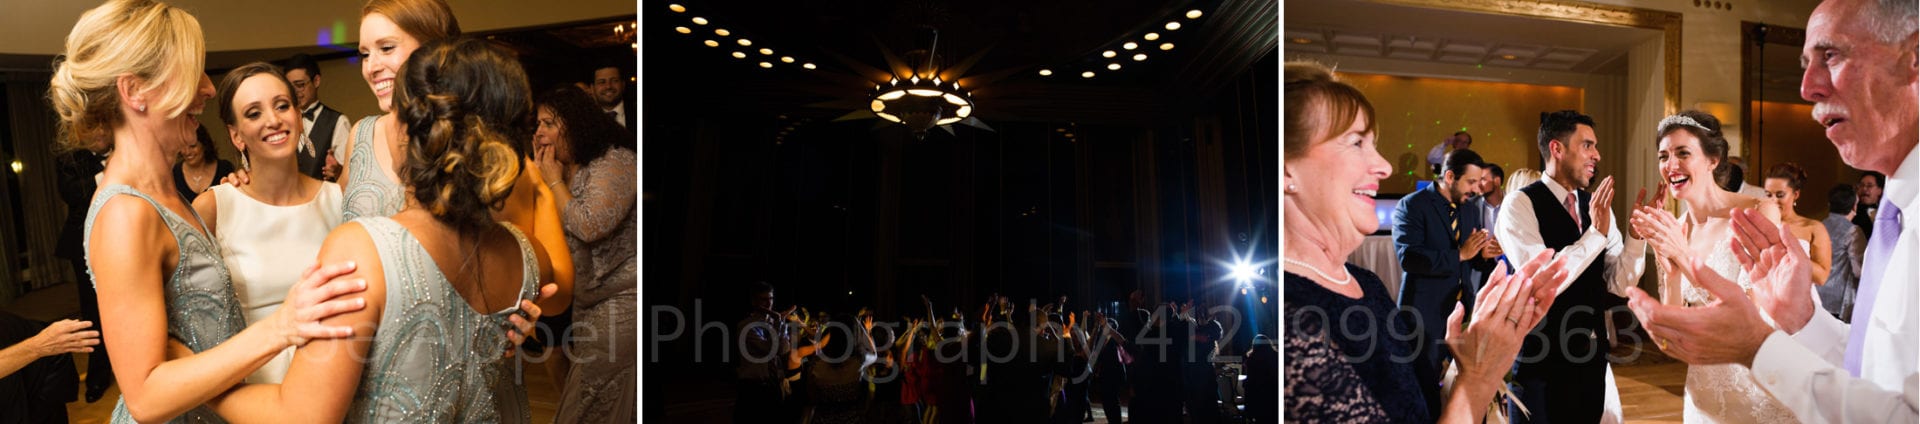 guests laugh and dance in illuminated rooms